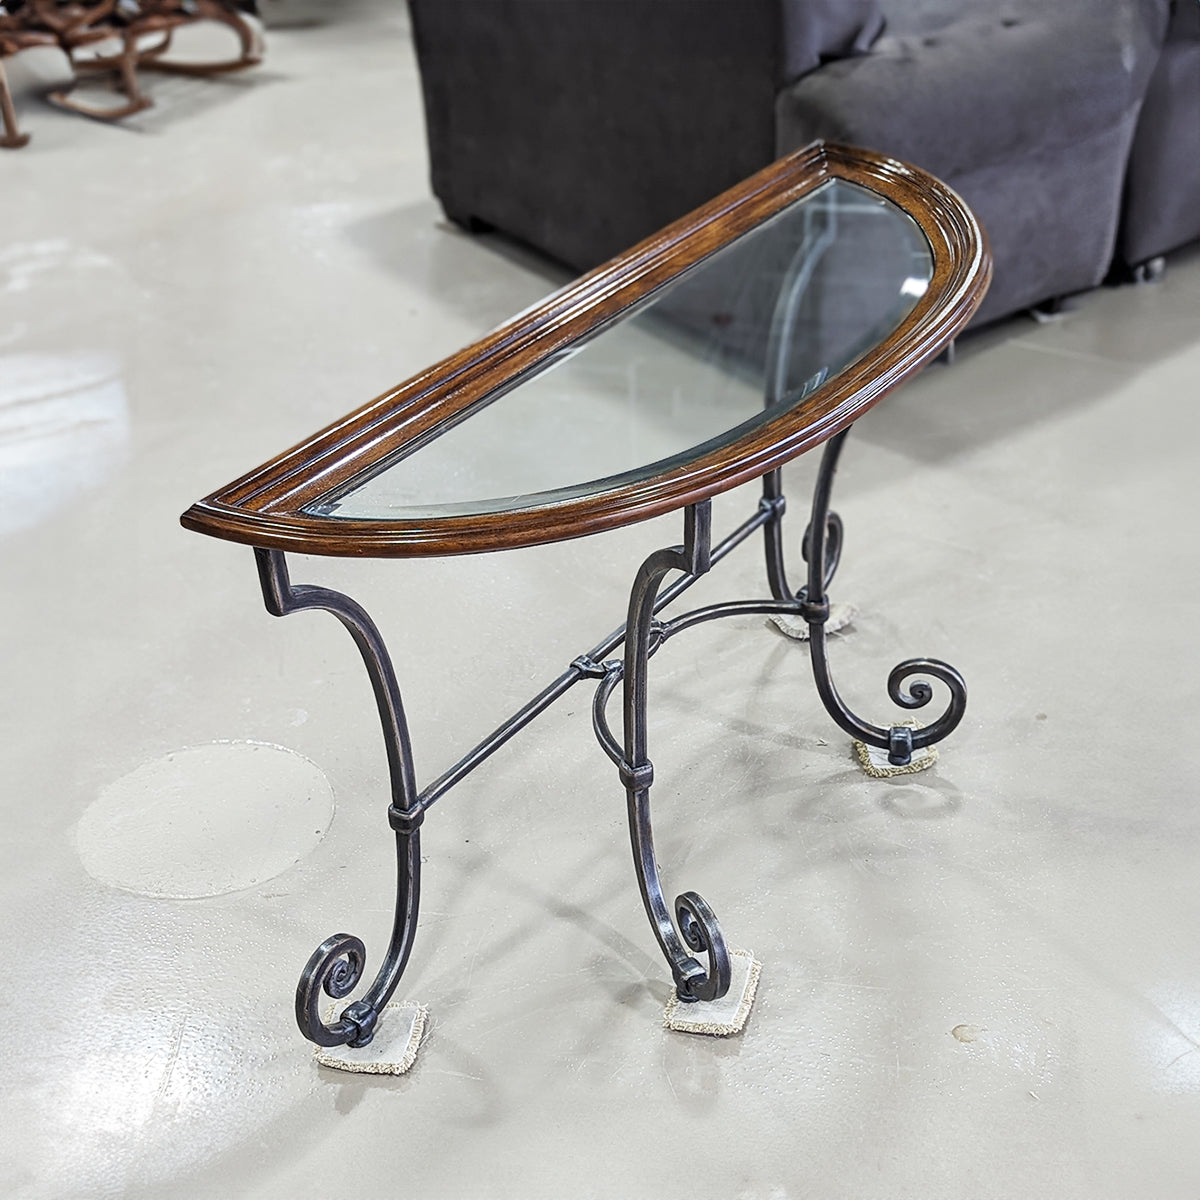 SET Ethan Allen Wrought Iron Glass Tables (Sold Separately) - Habroc - Online ReStore